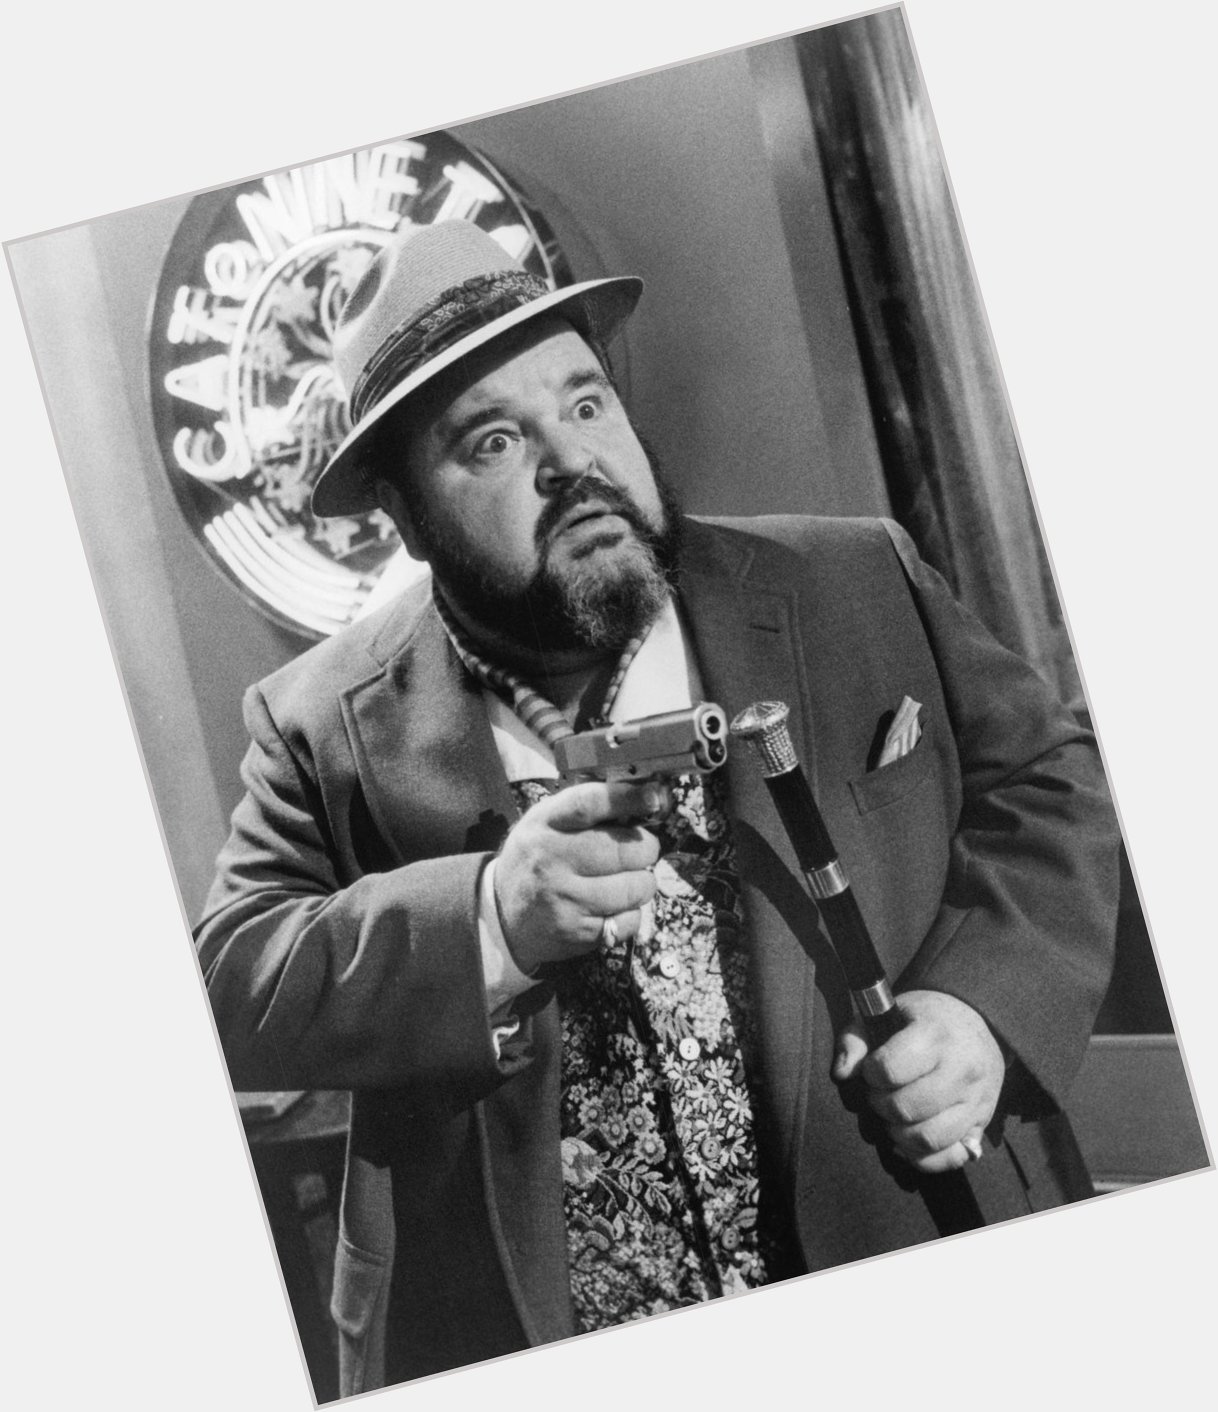 Happy Birthday to Dom DeLuise, who would have turned 82 today! 